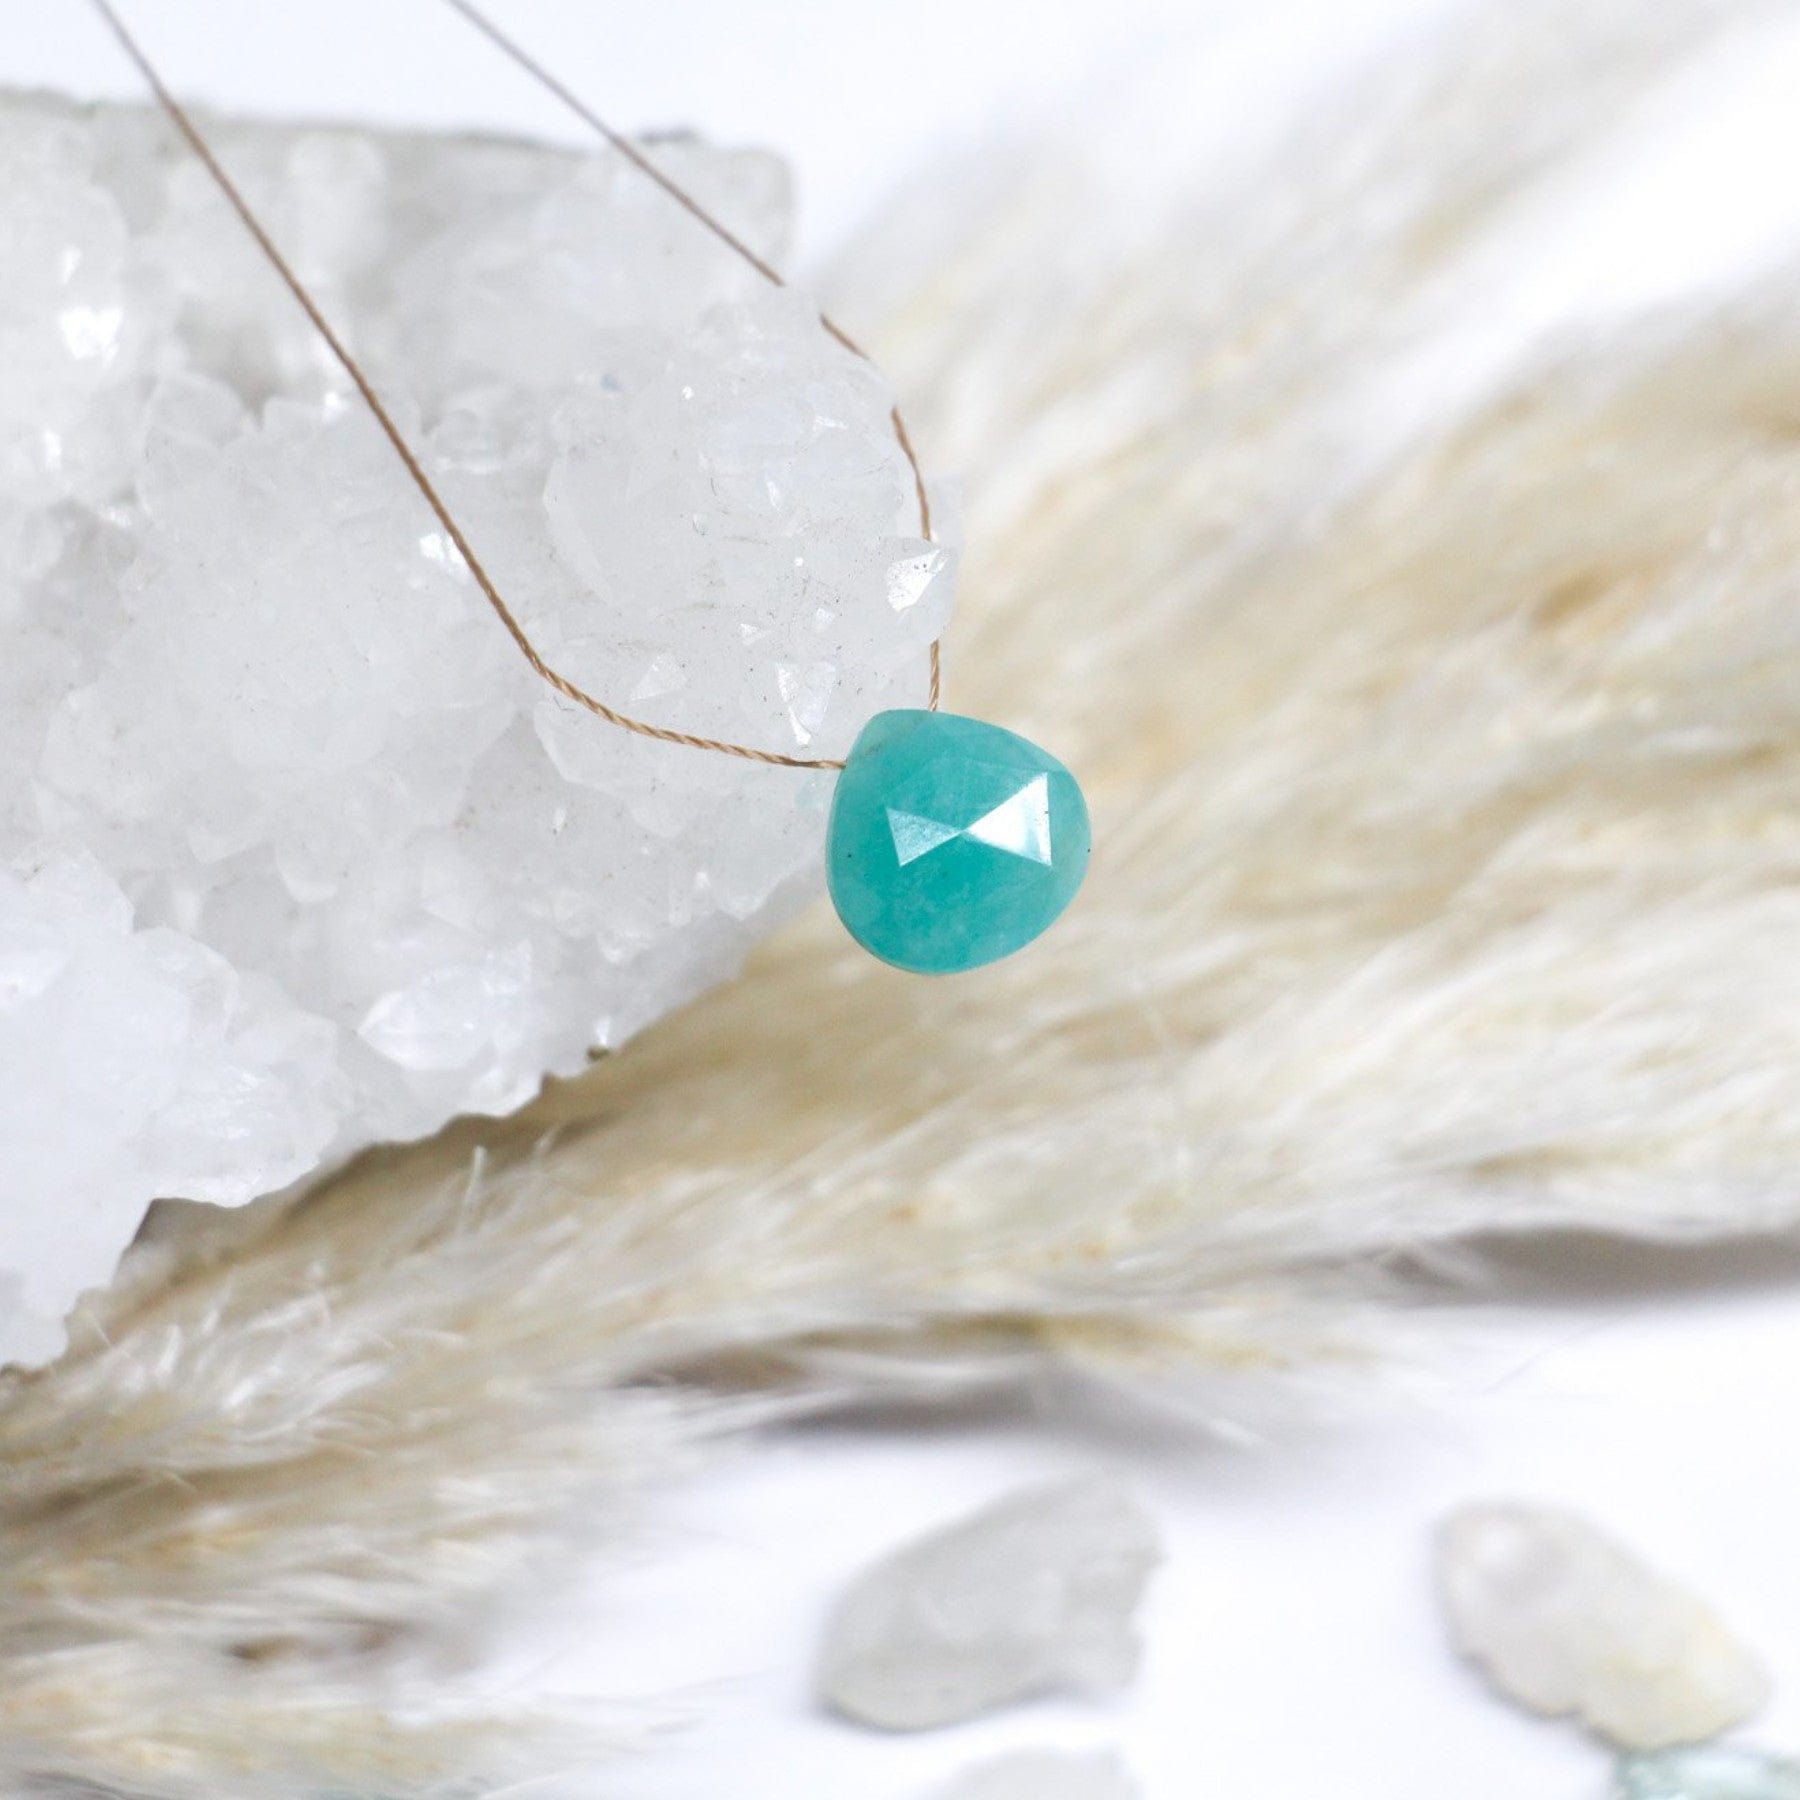 Turquoise gemstone pendant on thin chain over crystal geode, with soft white background and feather texture accents.